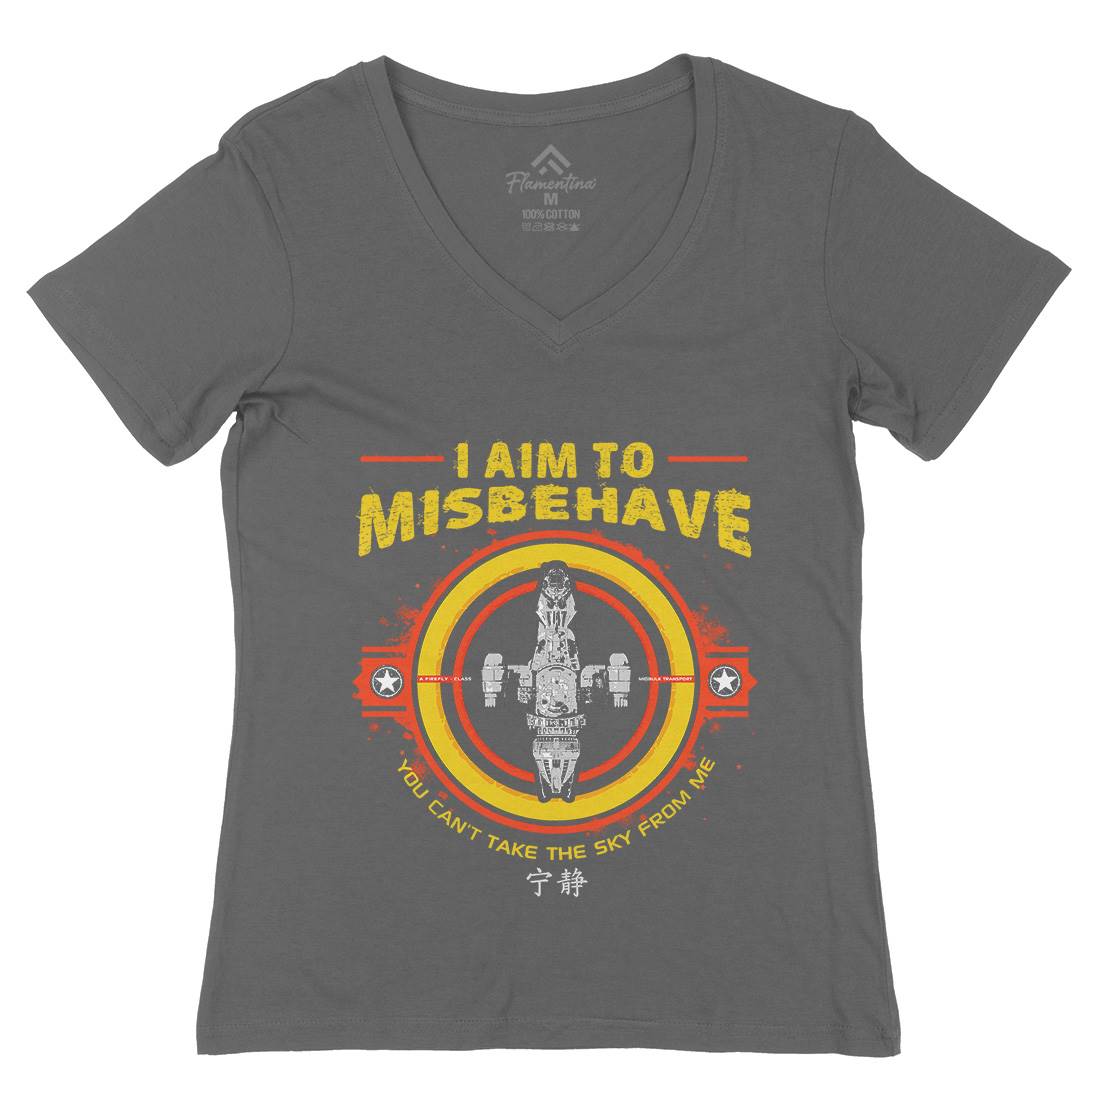 I Aim To Misbehave Womens Organic V-Neck T-Shirt Space D352